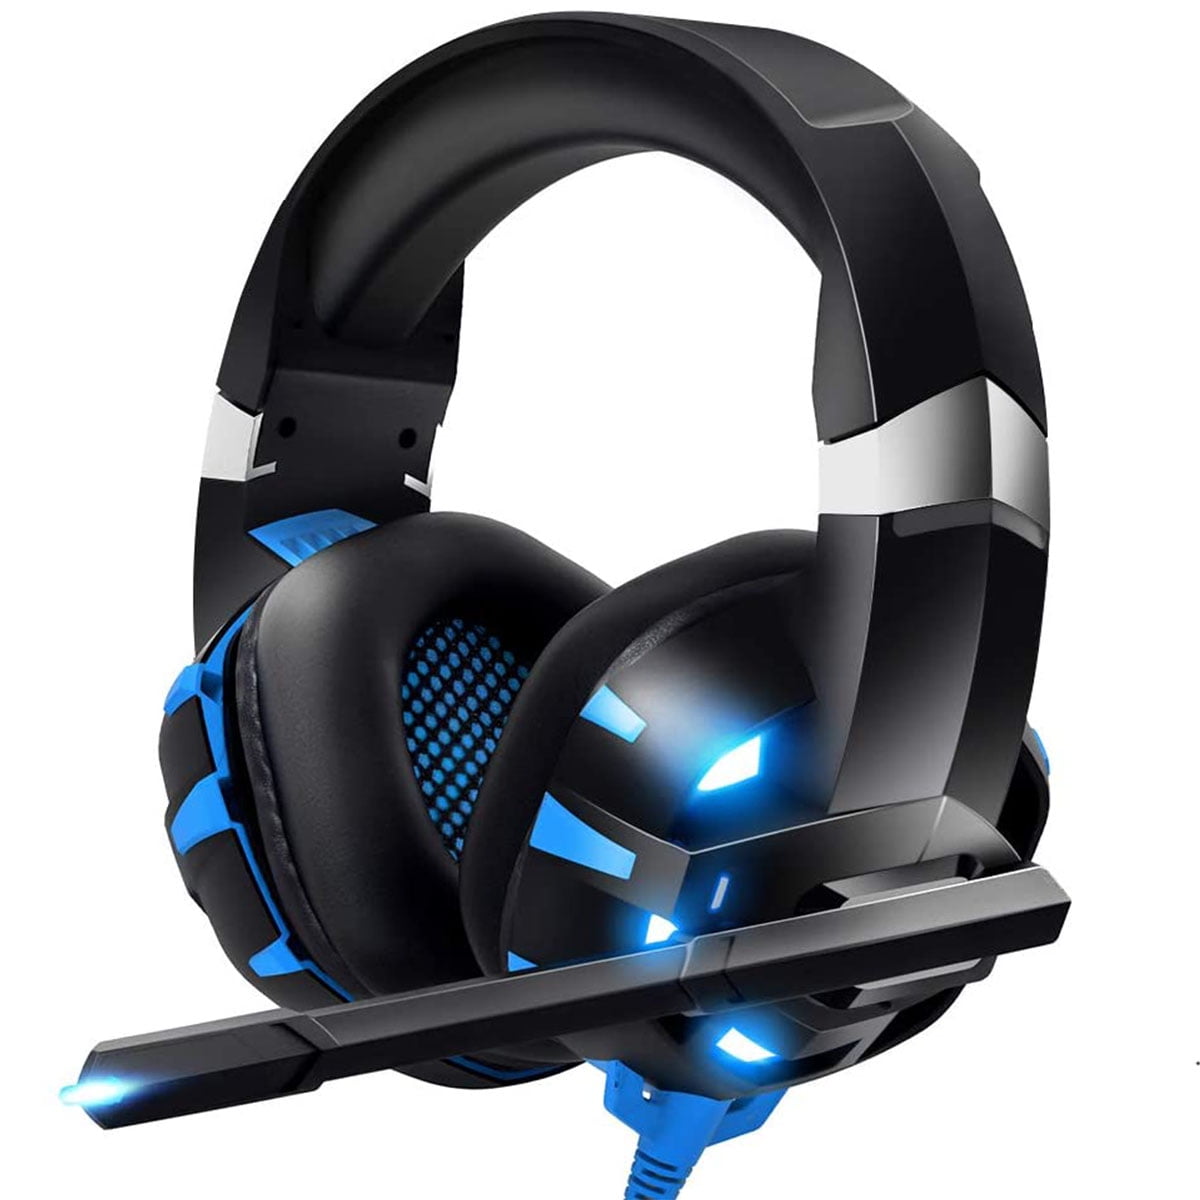 RUNMUS Stereo Gaming Headset for PS4, PS5, Xbox One, PC, Mobile, Noise